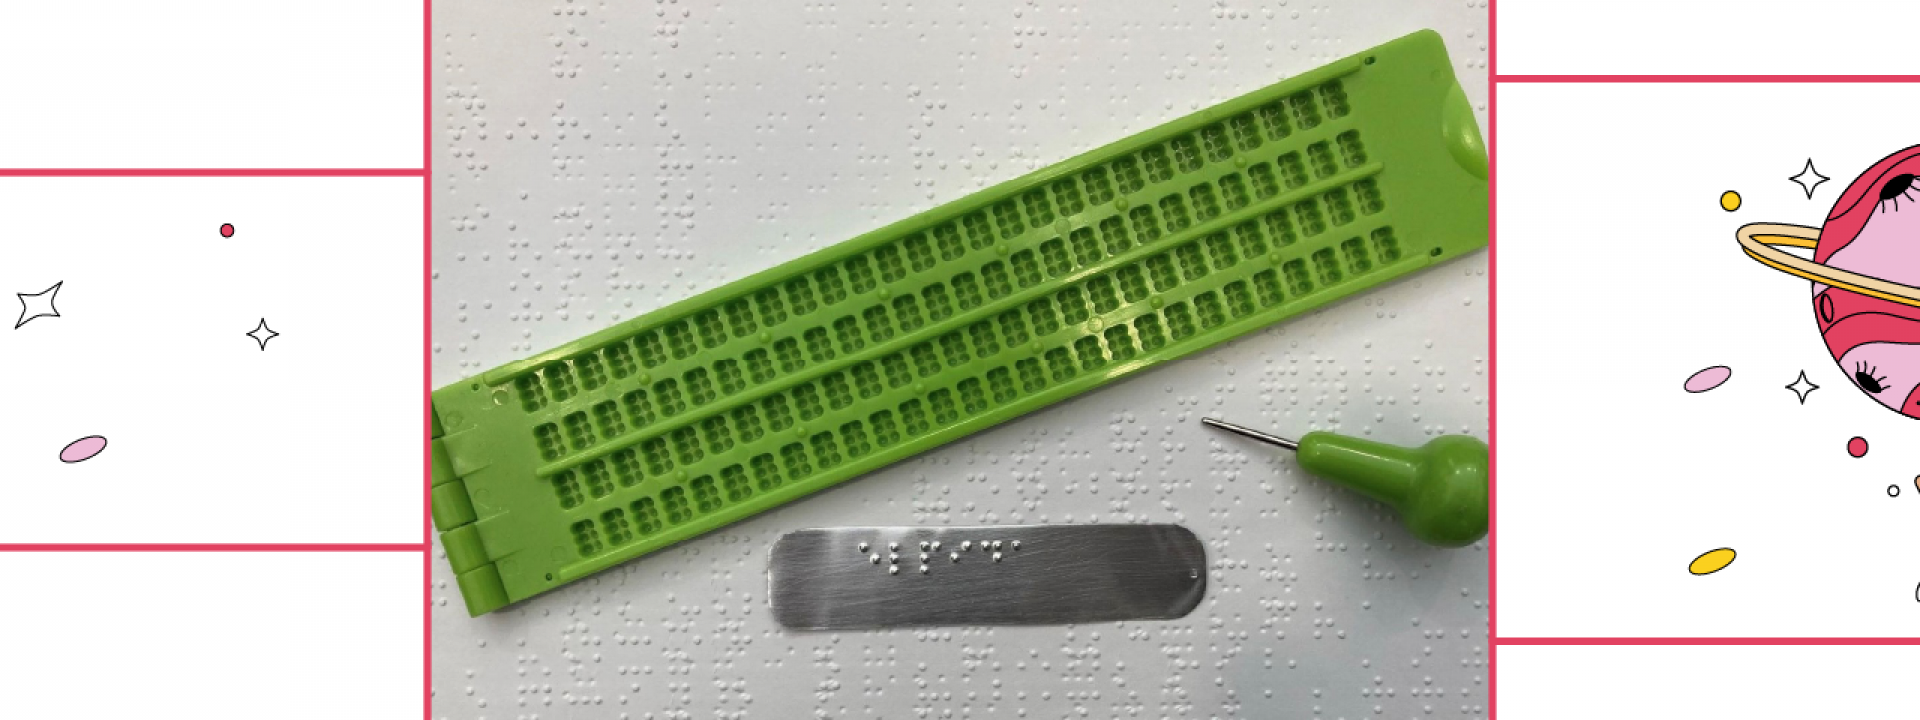 Members’ Event Adults | Metal bookmark construction workshop using the Braille system - Εικόνα